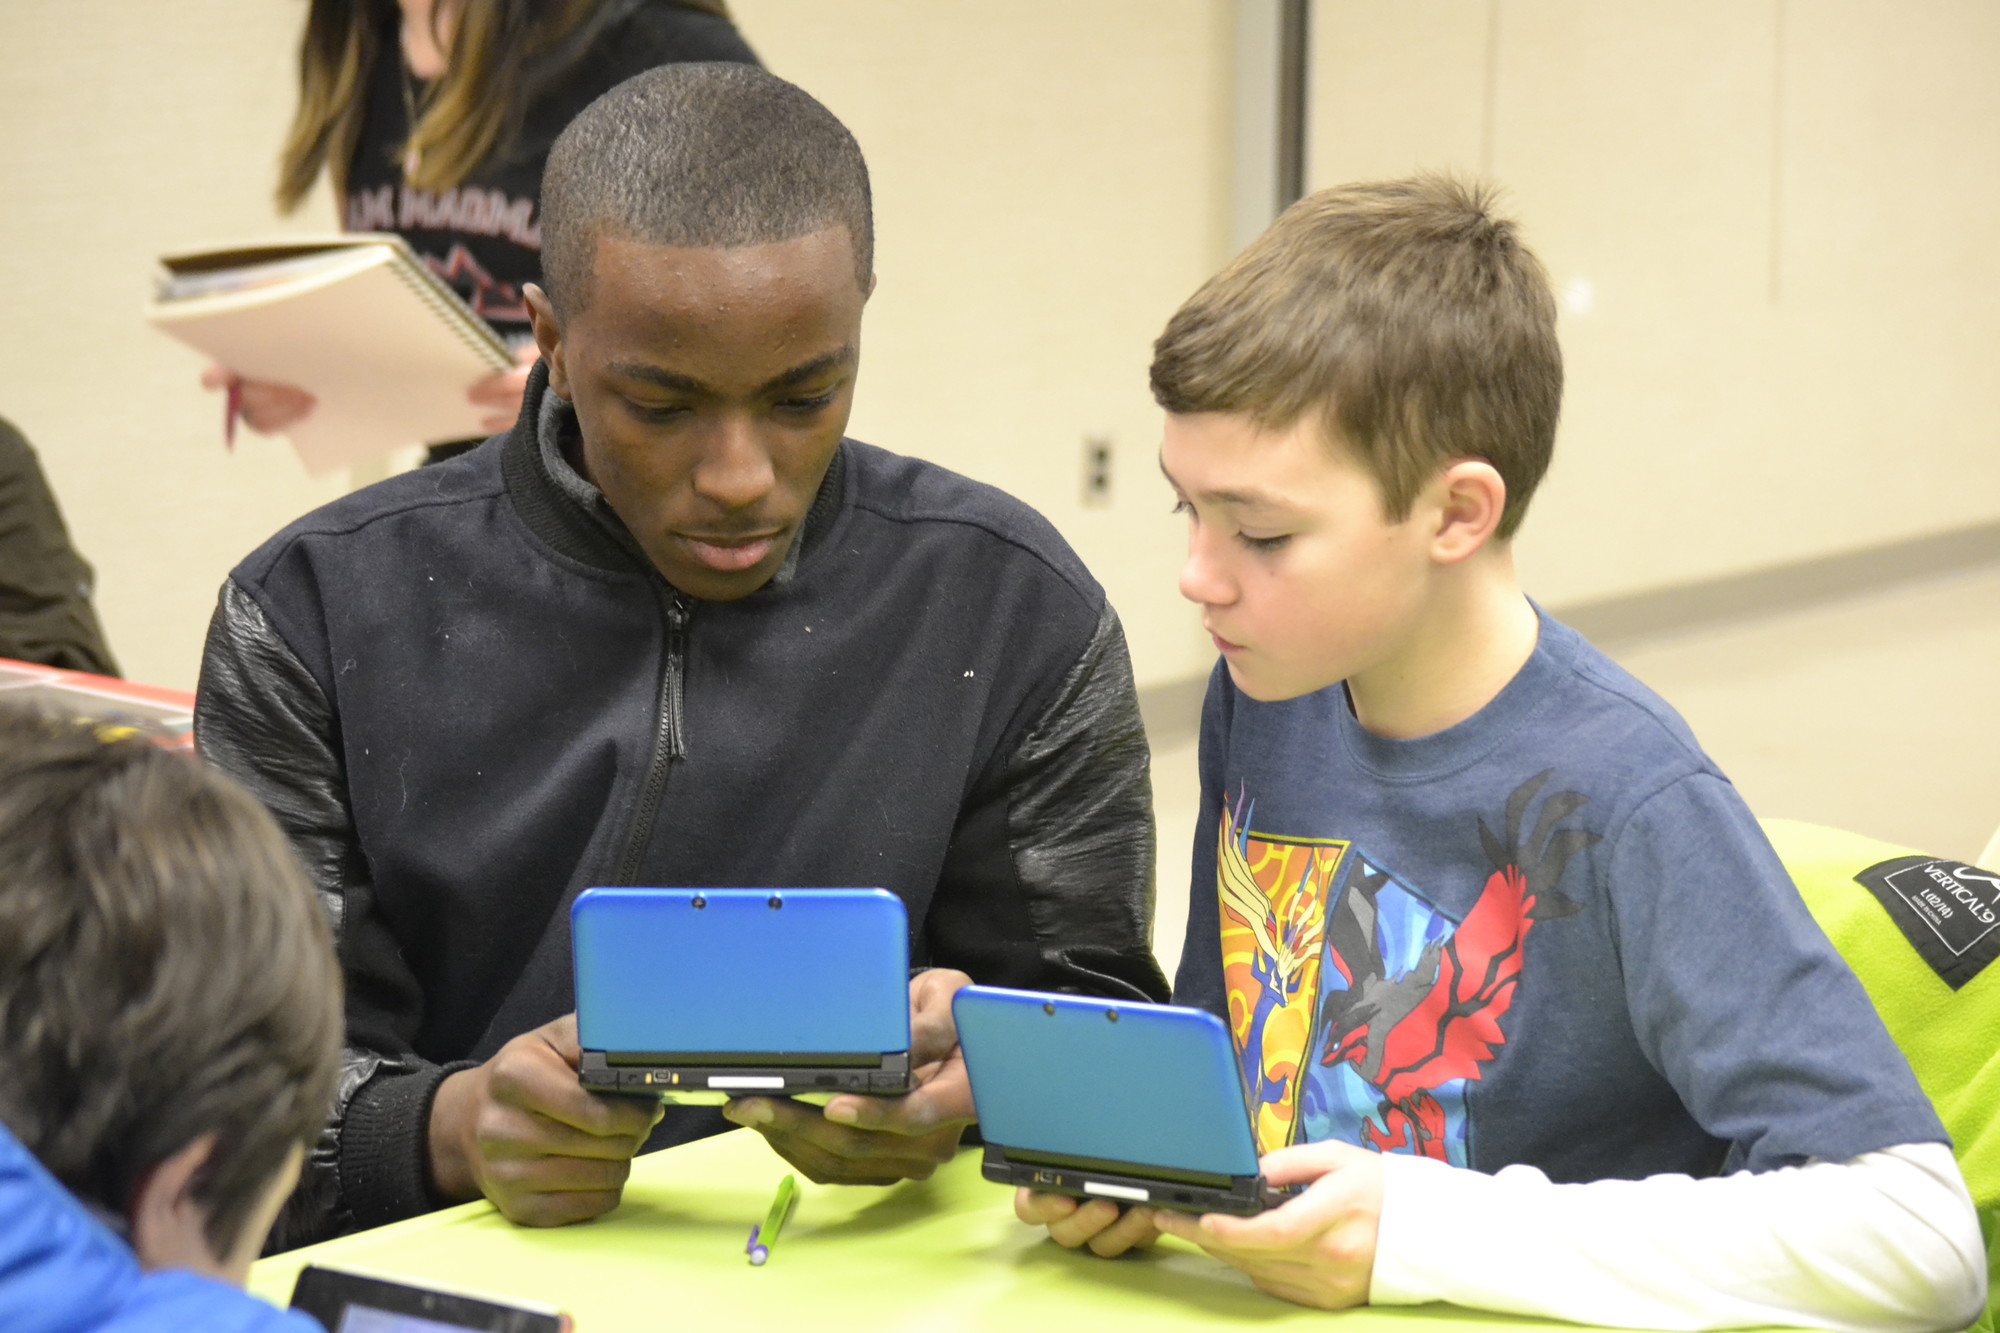 Kenath, 17, and Sean Loftus, 13, dualed it out head-to-head in a video game battle on Nintendo 3DS.